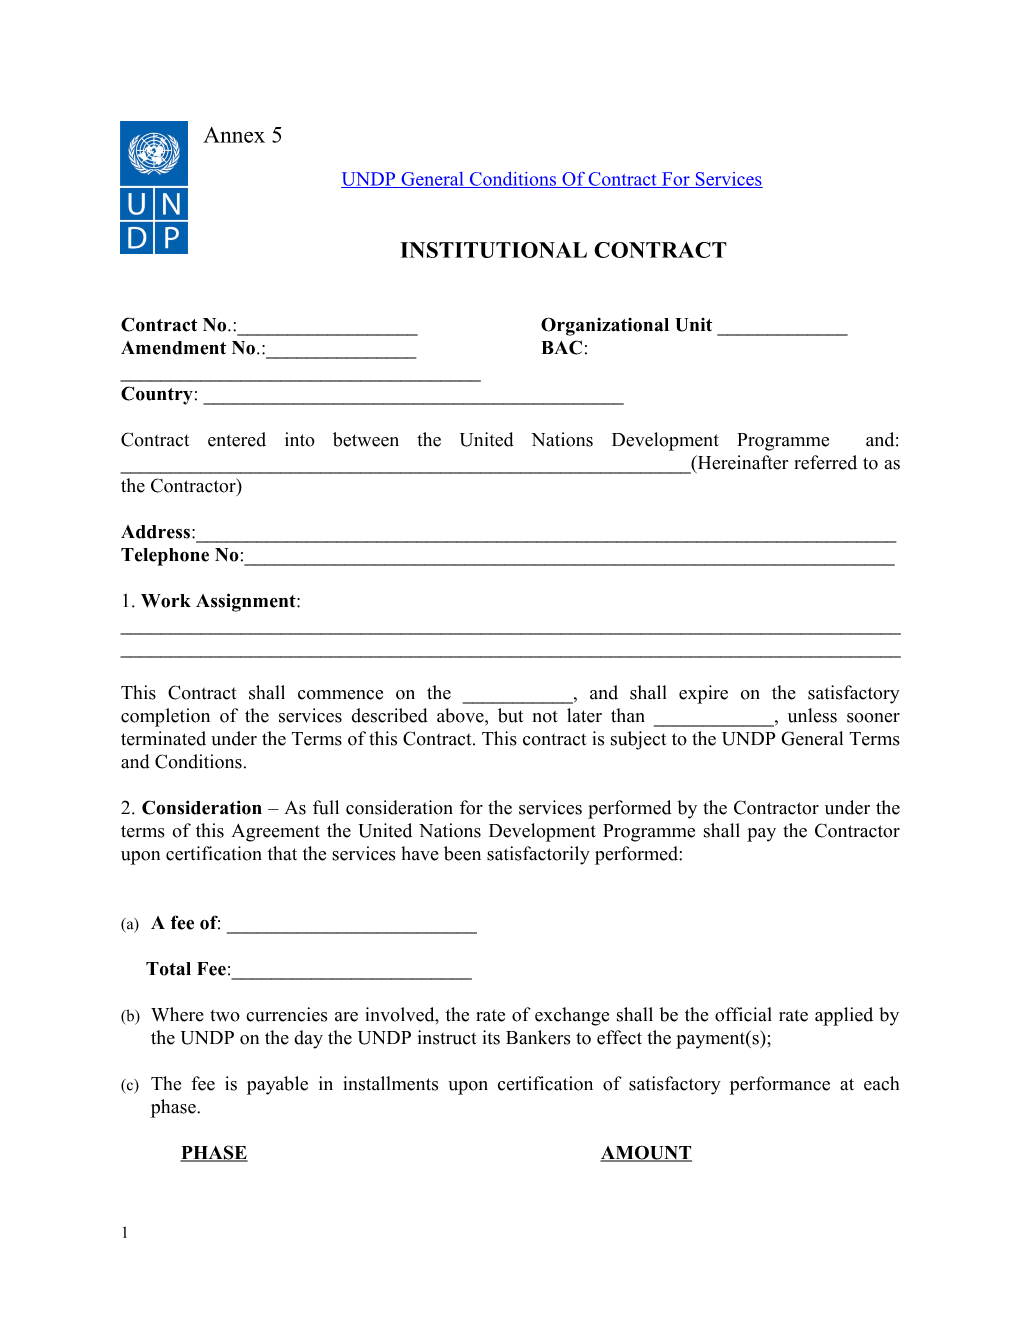 UNDP General Conditions of Contract for Services